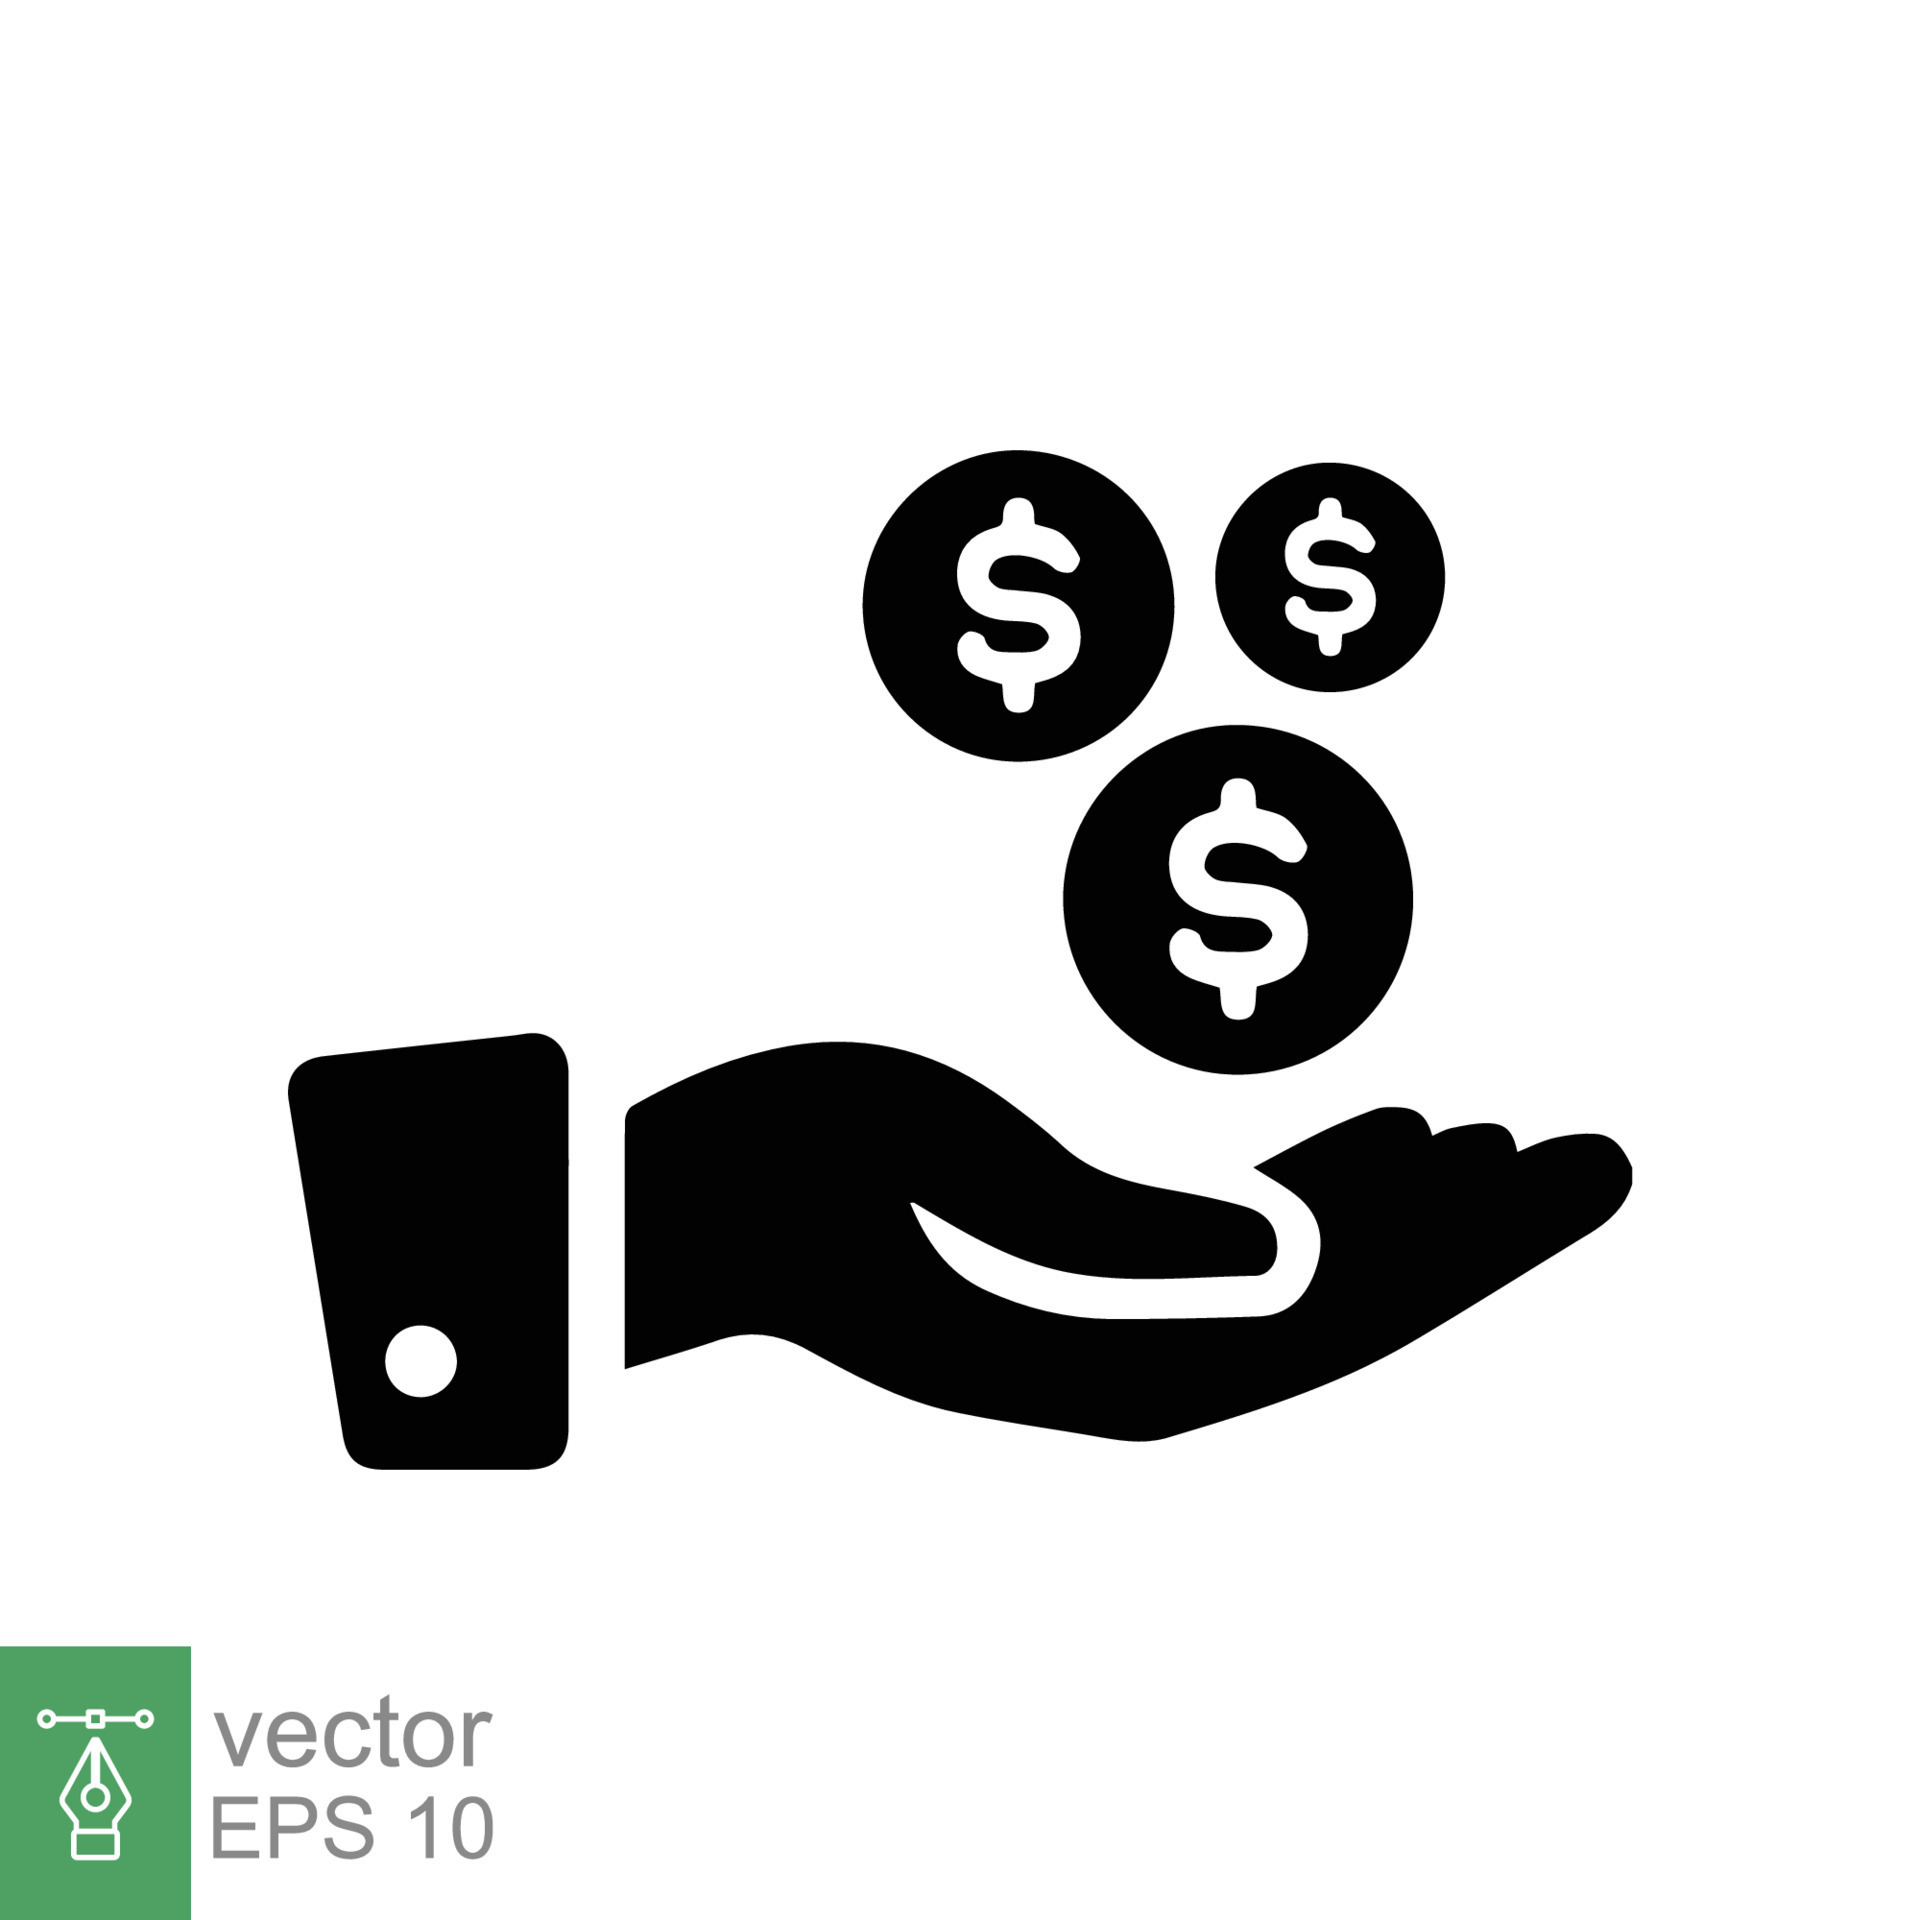 Money Bag Dollar Sign Drawing High-Res Vector Graphic - Getty Images